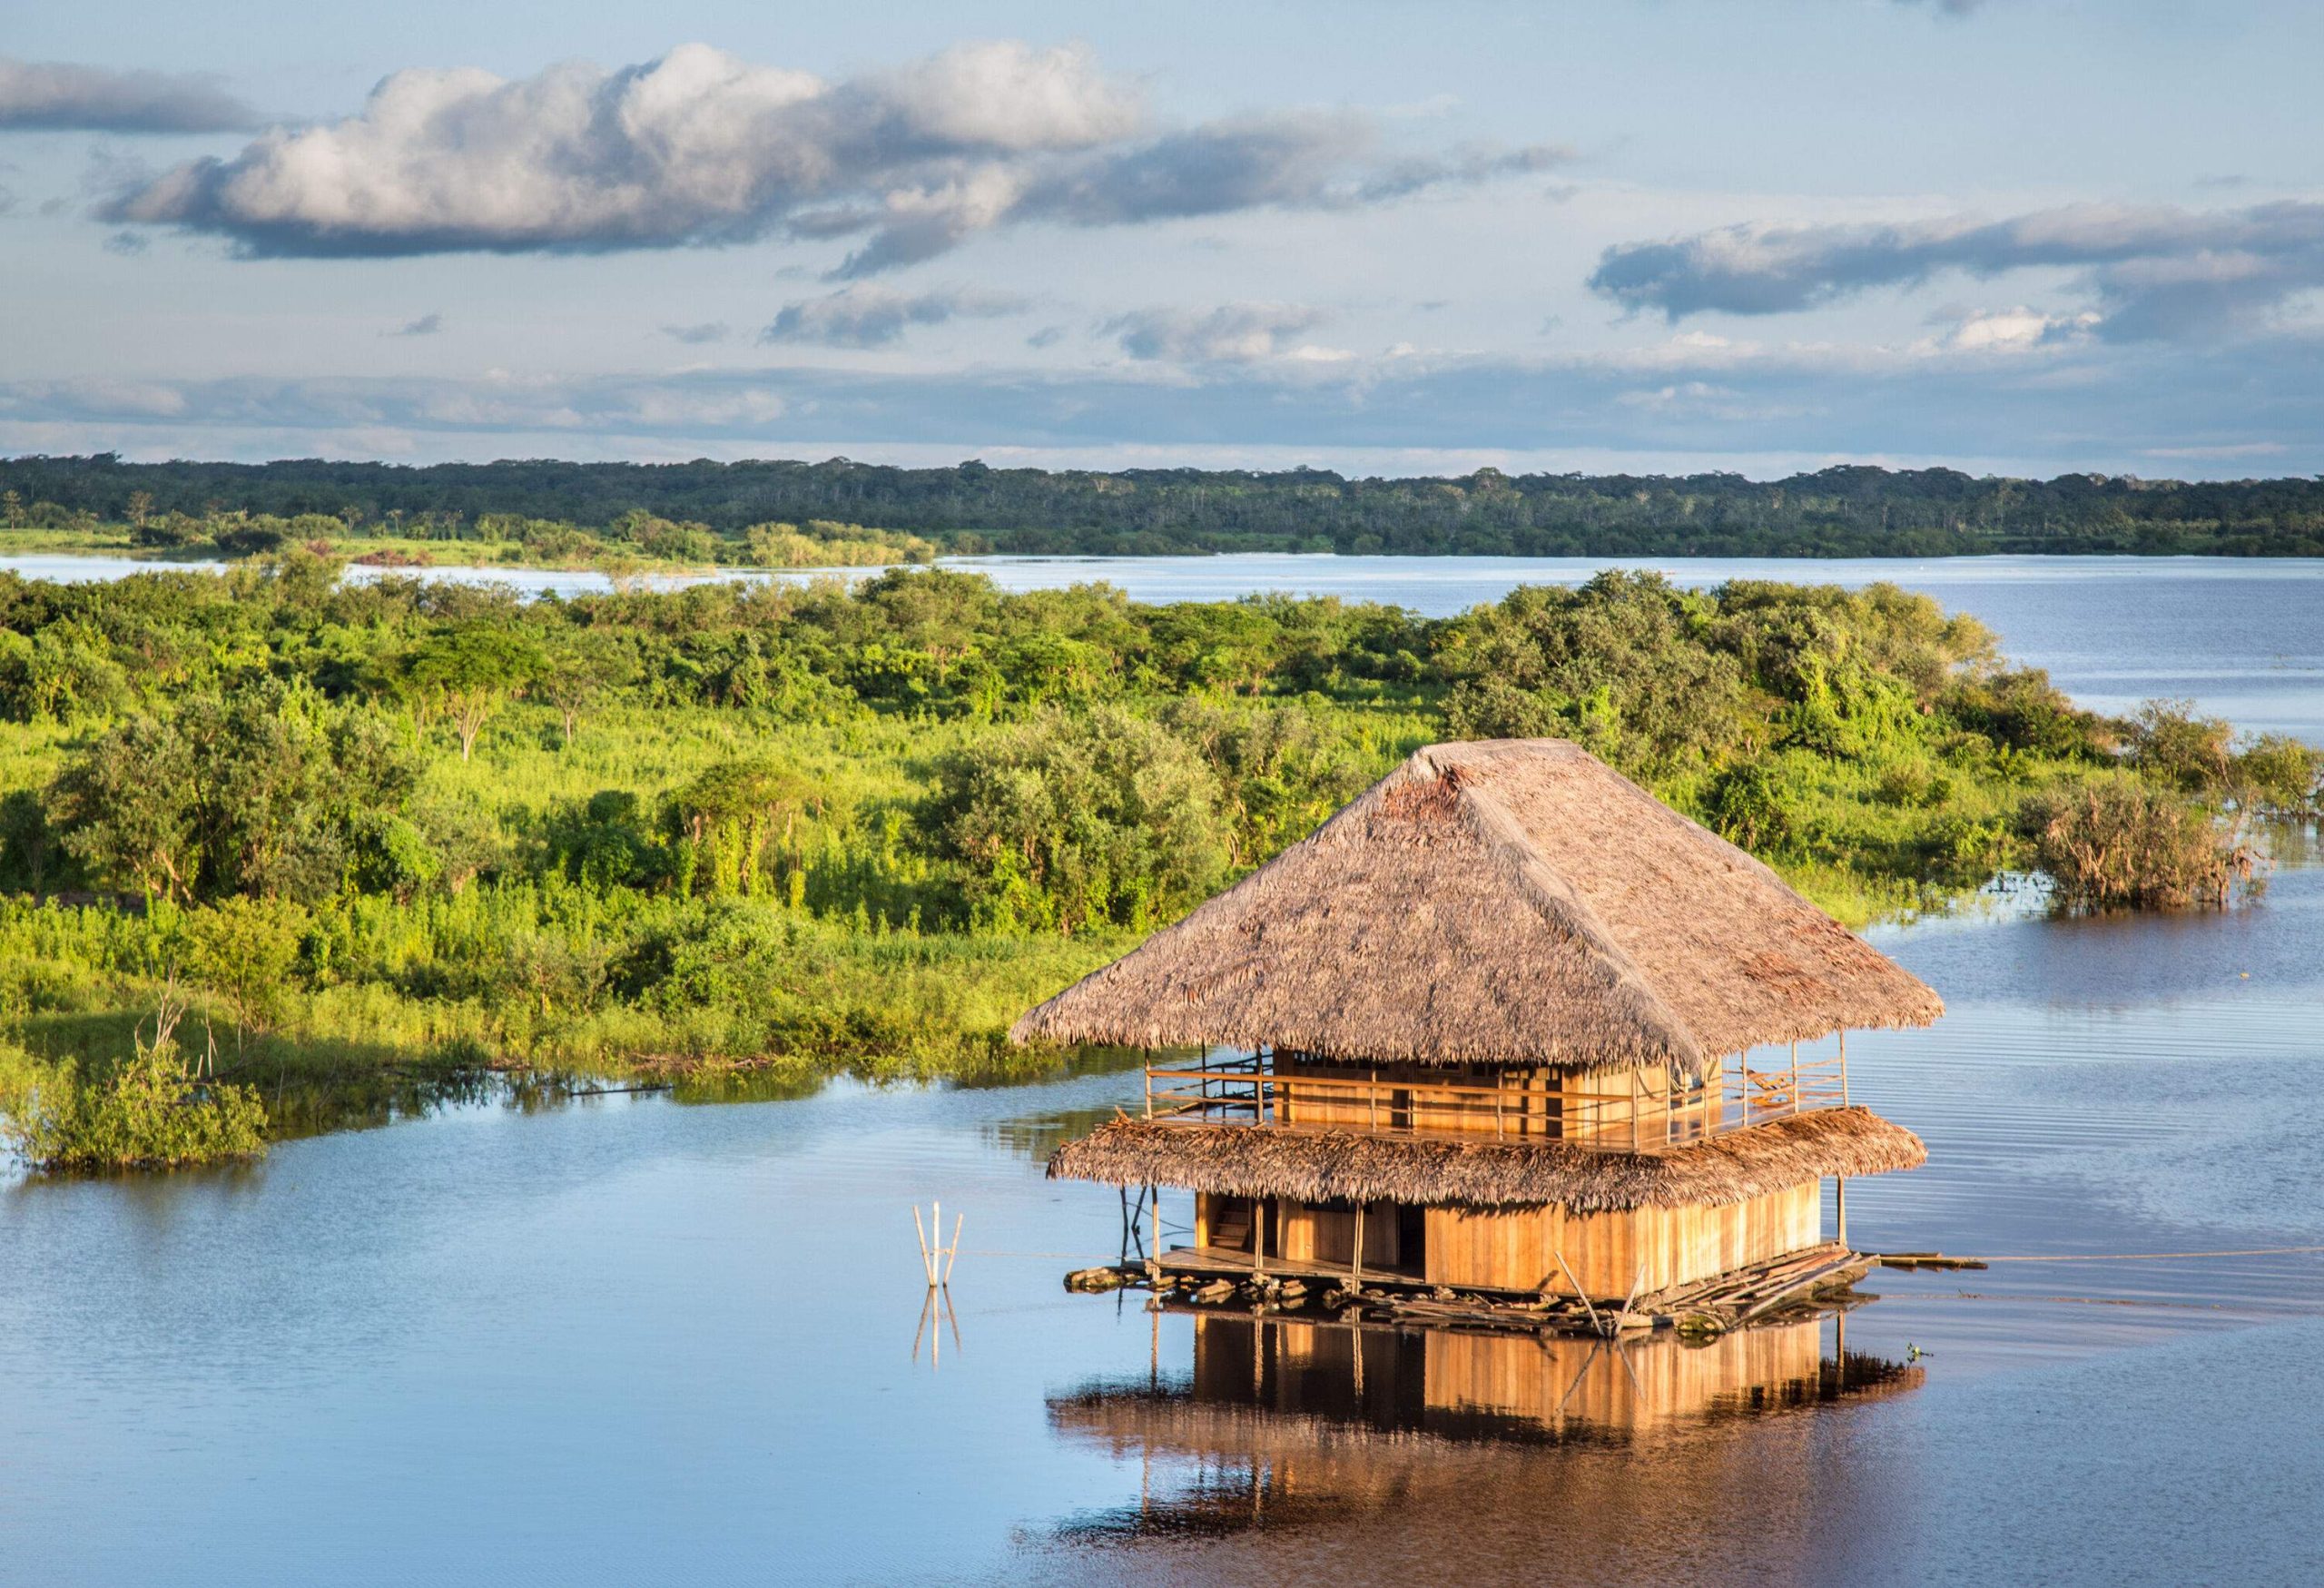 A wooden house with thatched roofs perched in the waters of a calm river with views of a grassy riverbank.